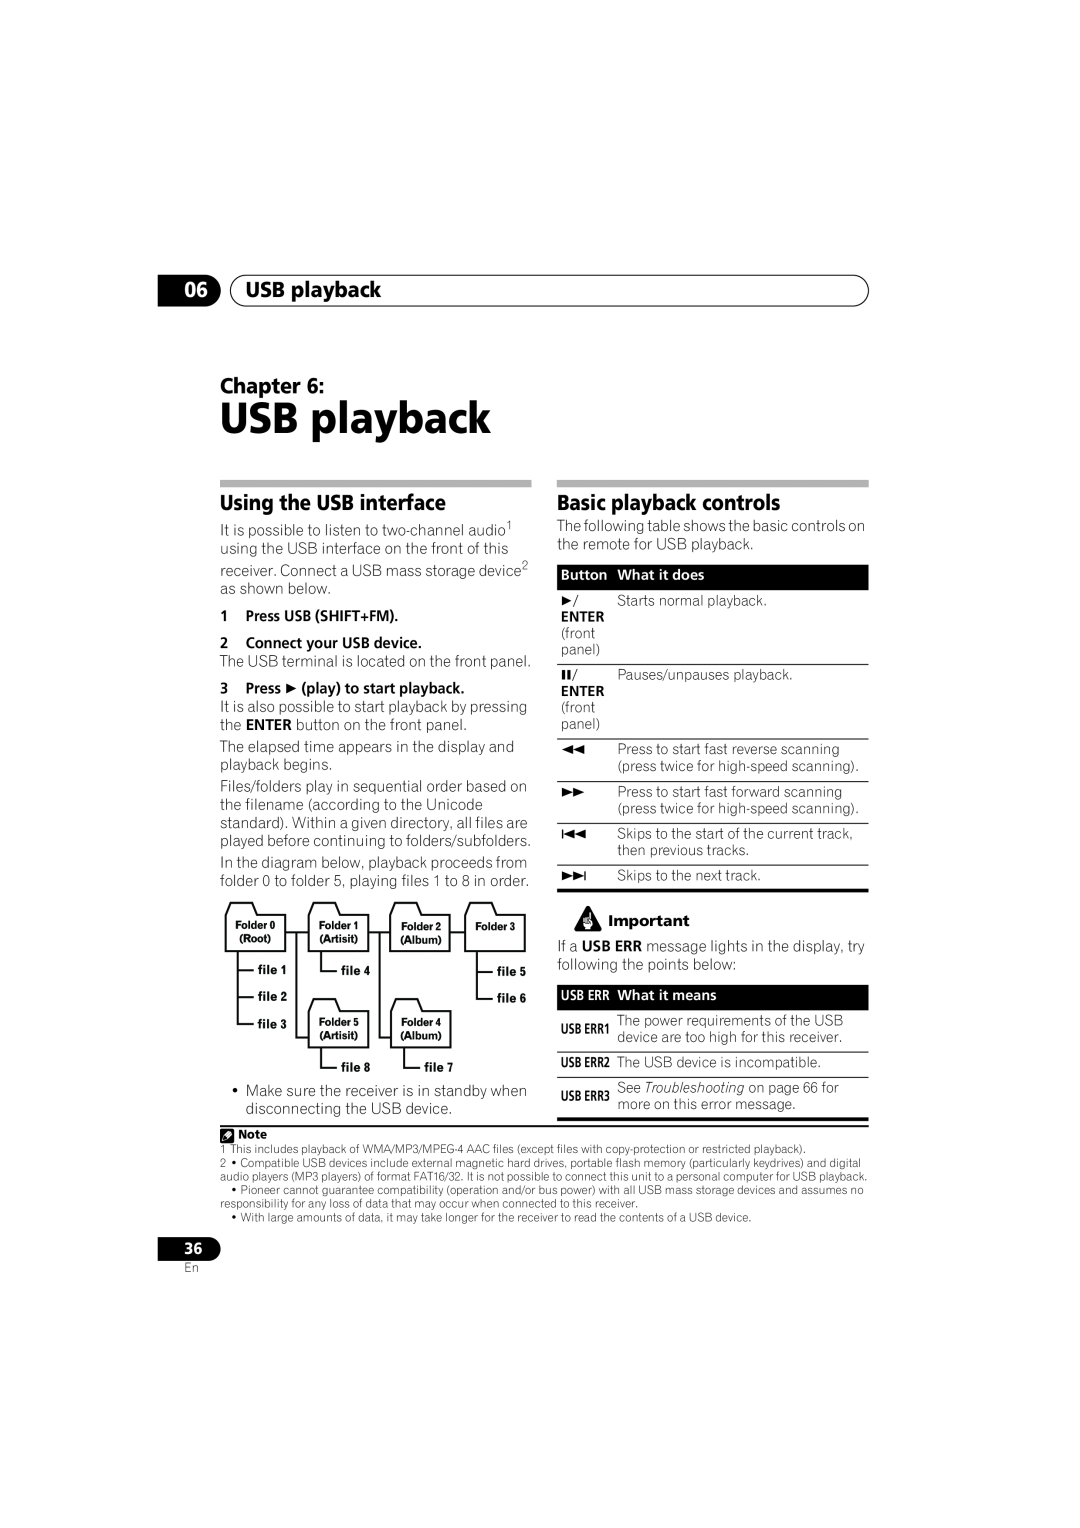 Pioneer VSX-917V-S/-K 06USB playback Chapter, Using the USB interface, Basic playback controls, Button What it does 